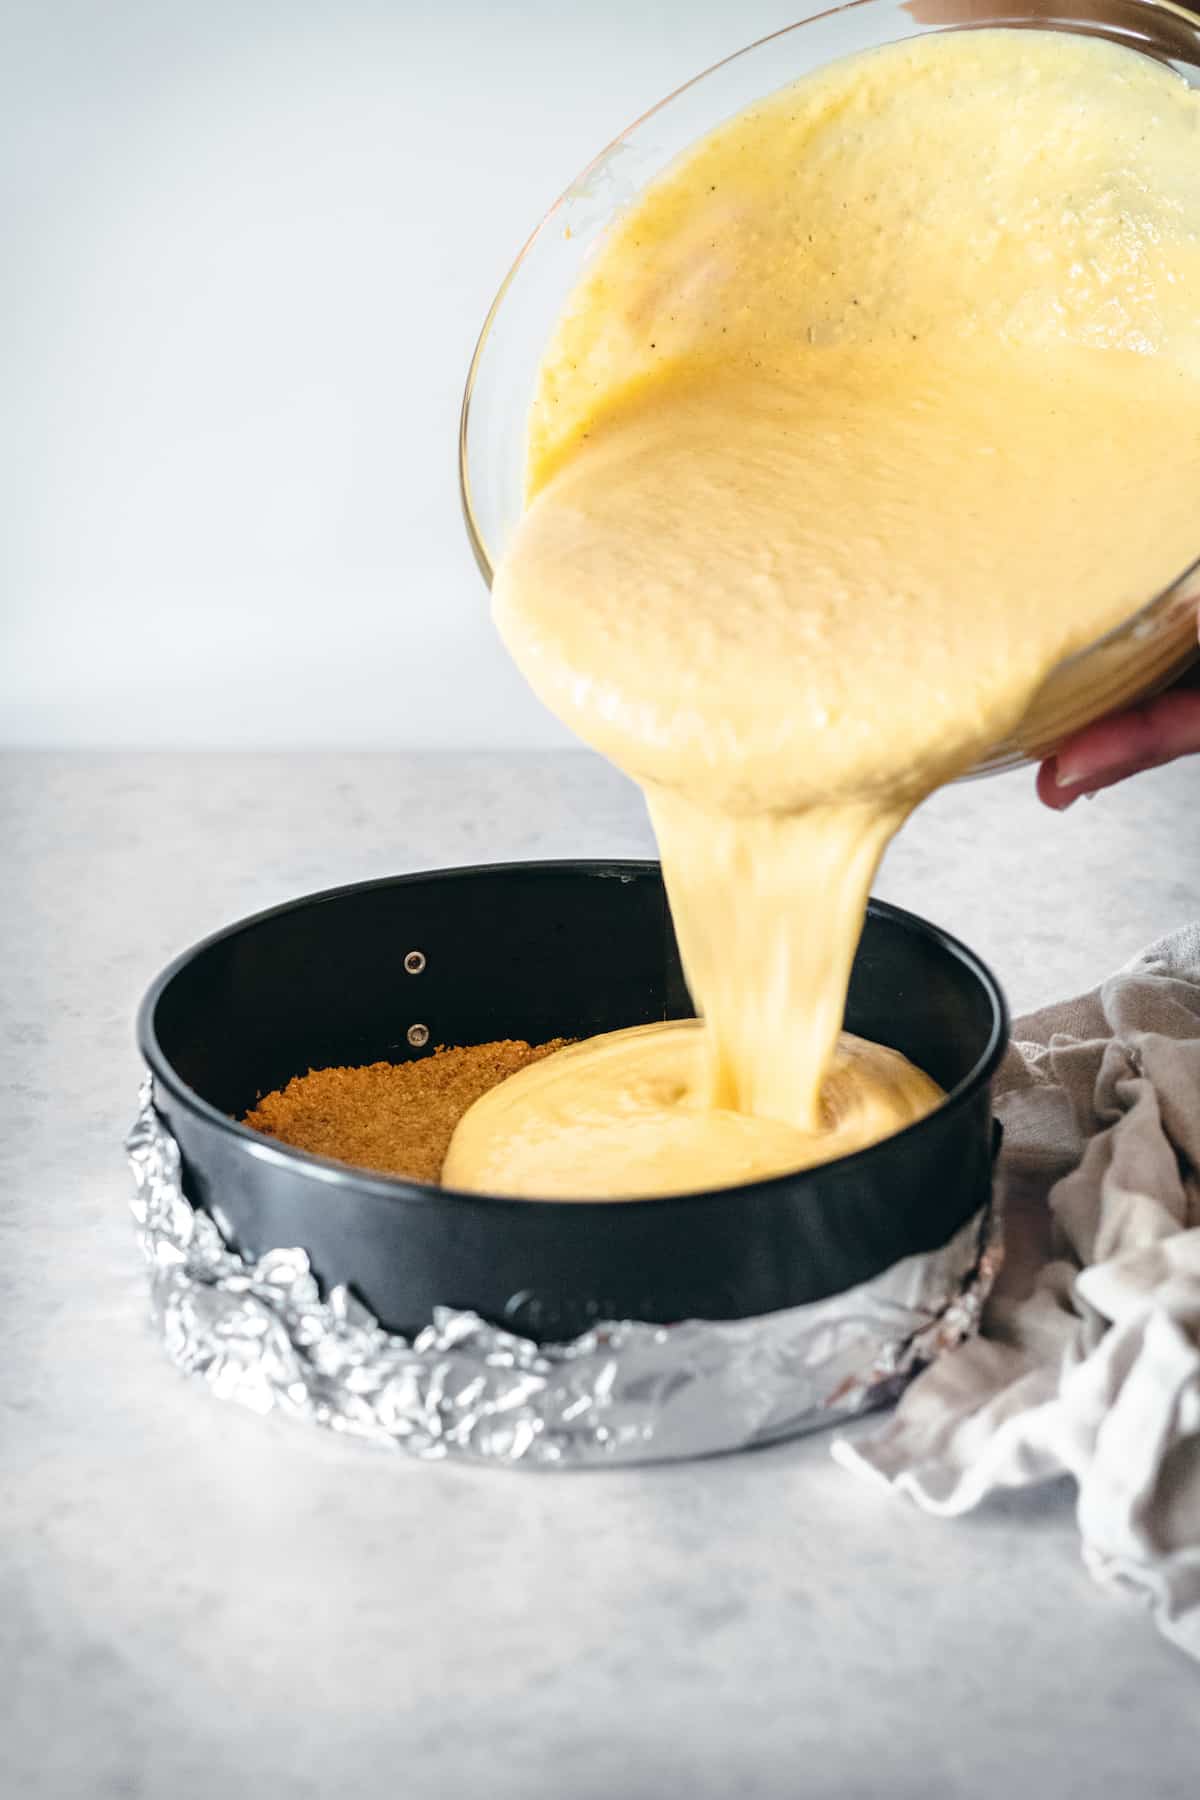 Pumpkin cheesecake batter being poured into a springform pan